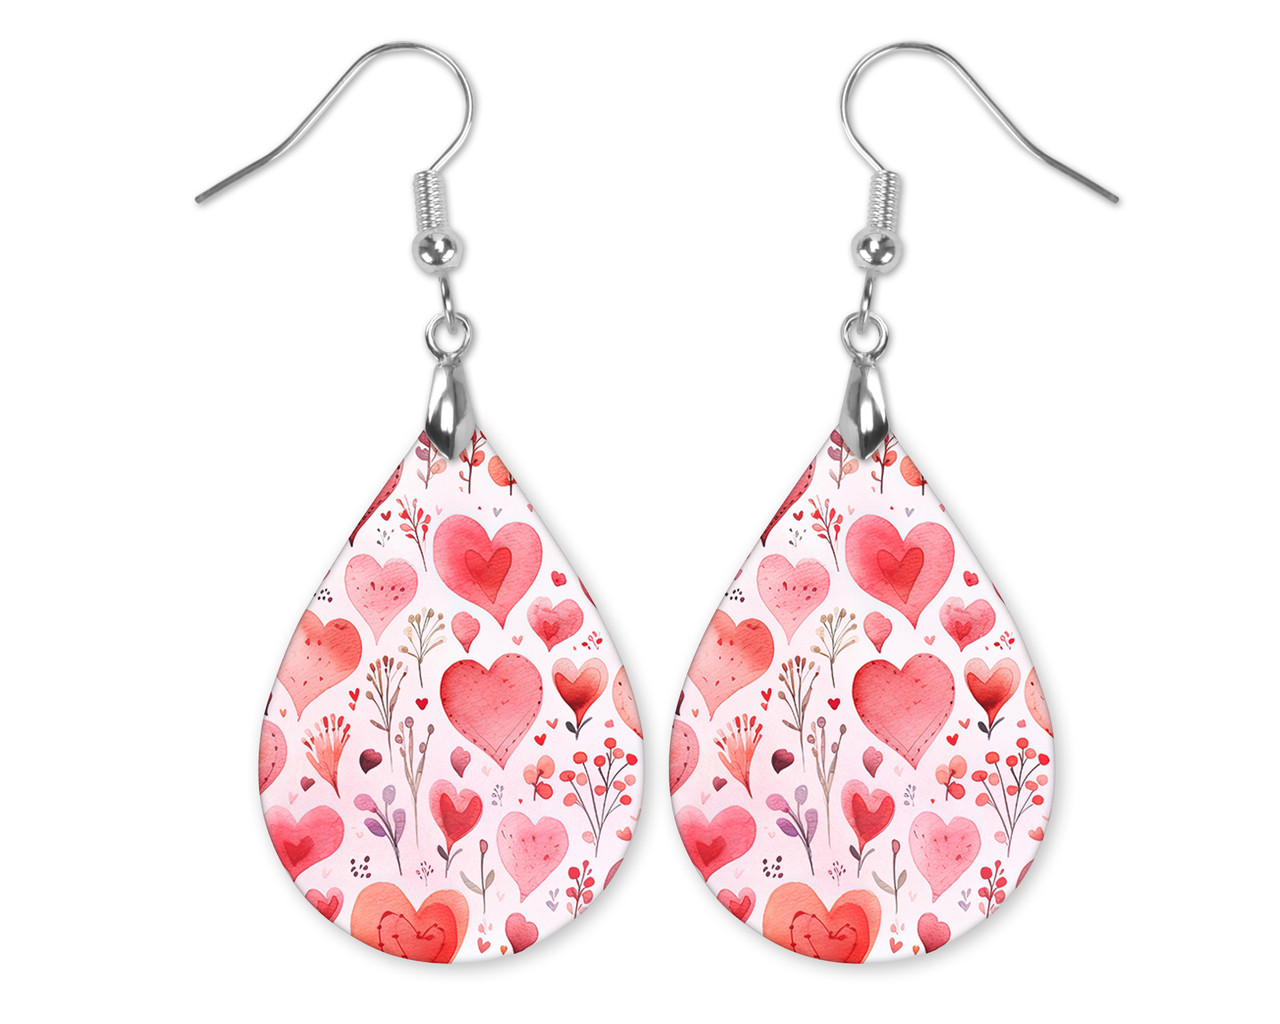 Love Jointed Hearts • Valentines Day Earrings